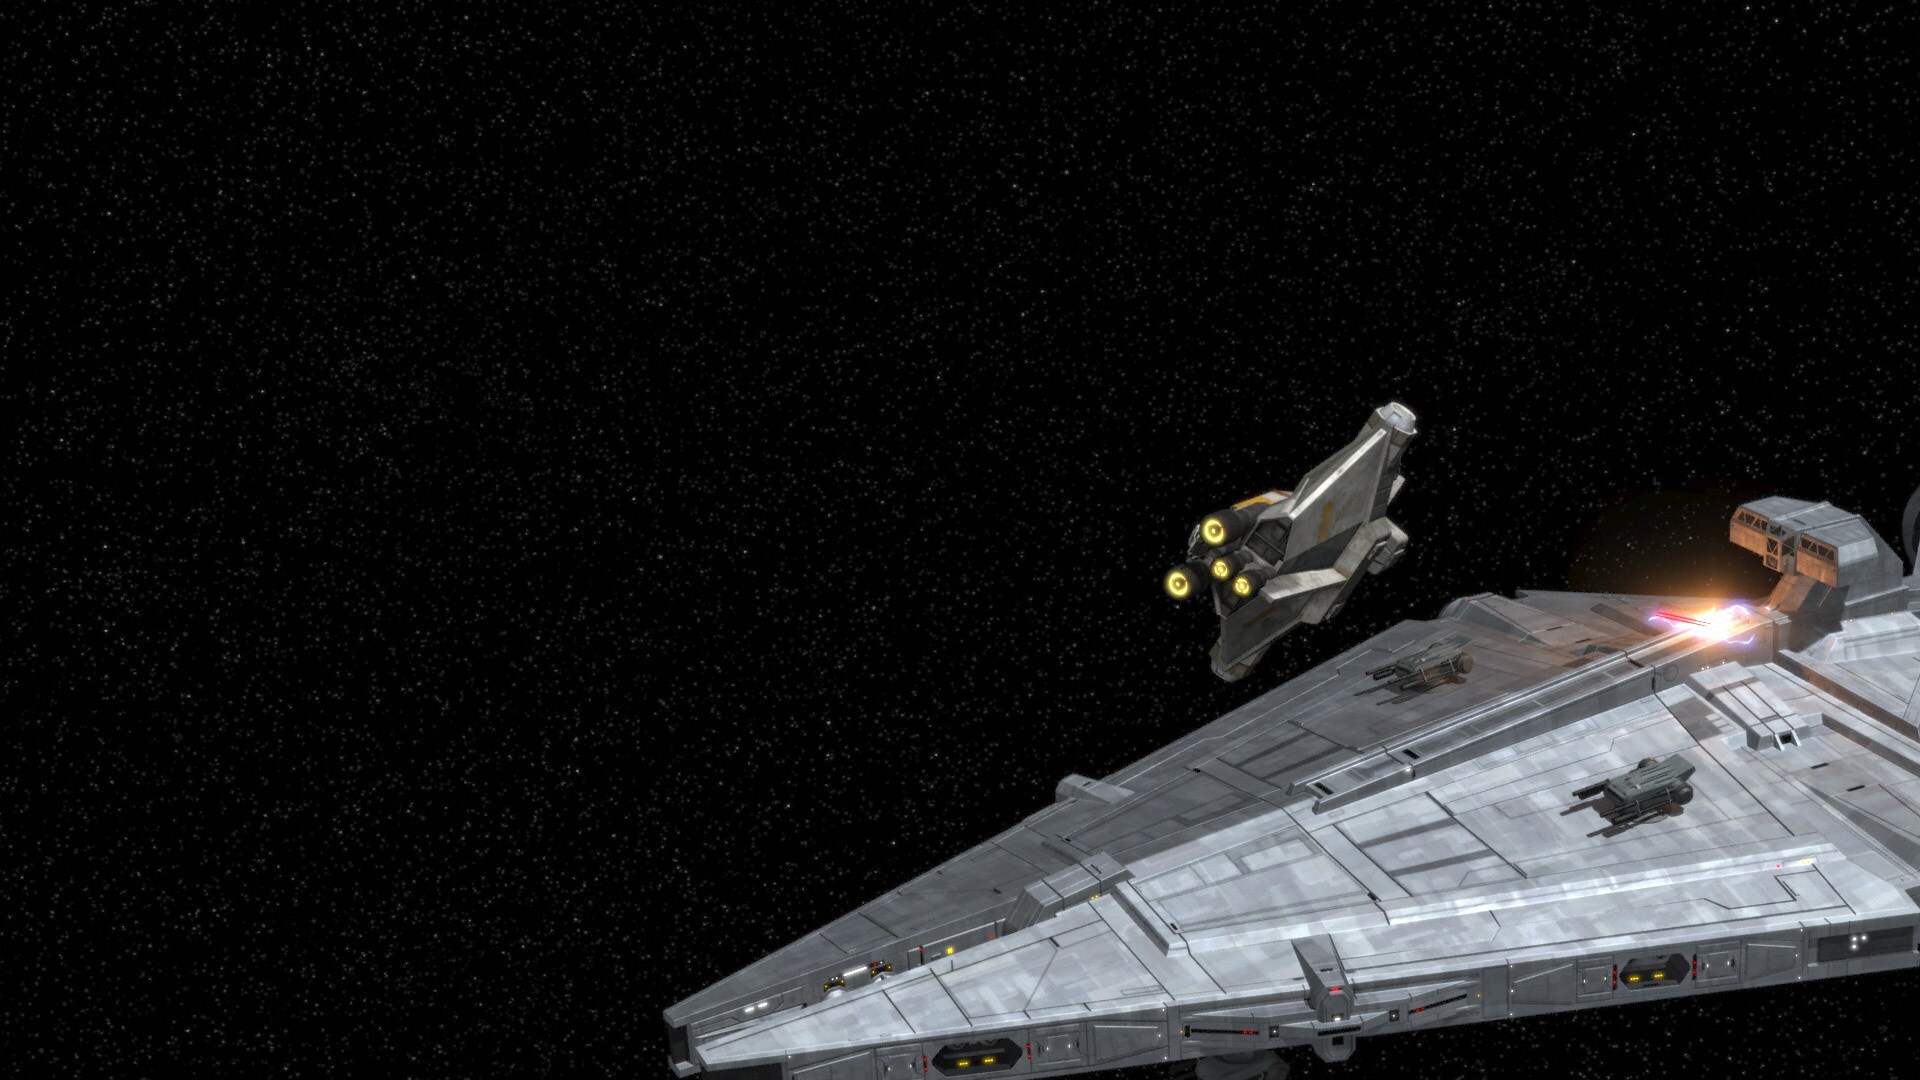 This marks the debut of the Imperial light cruiser, a reworking of the Jedi light cruiser seen in...